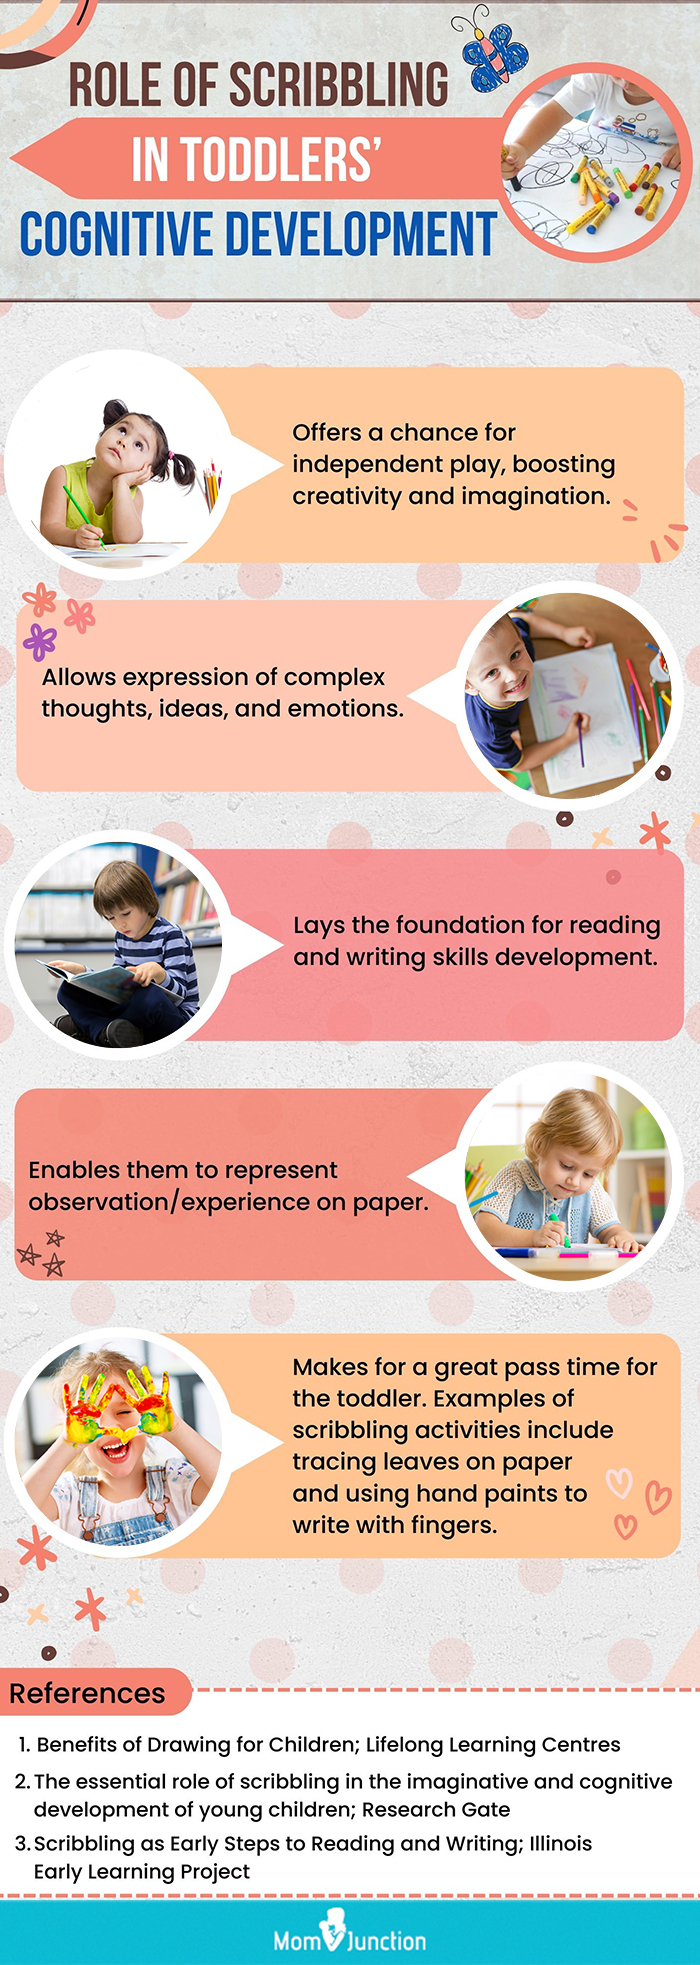 role of scribbling in toddlers’cognitive development (infographic)